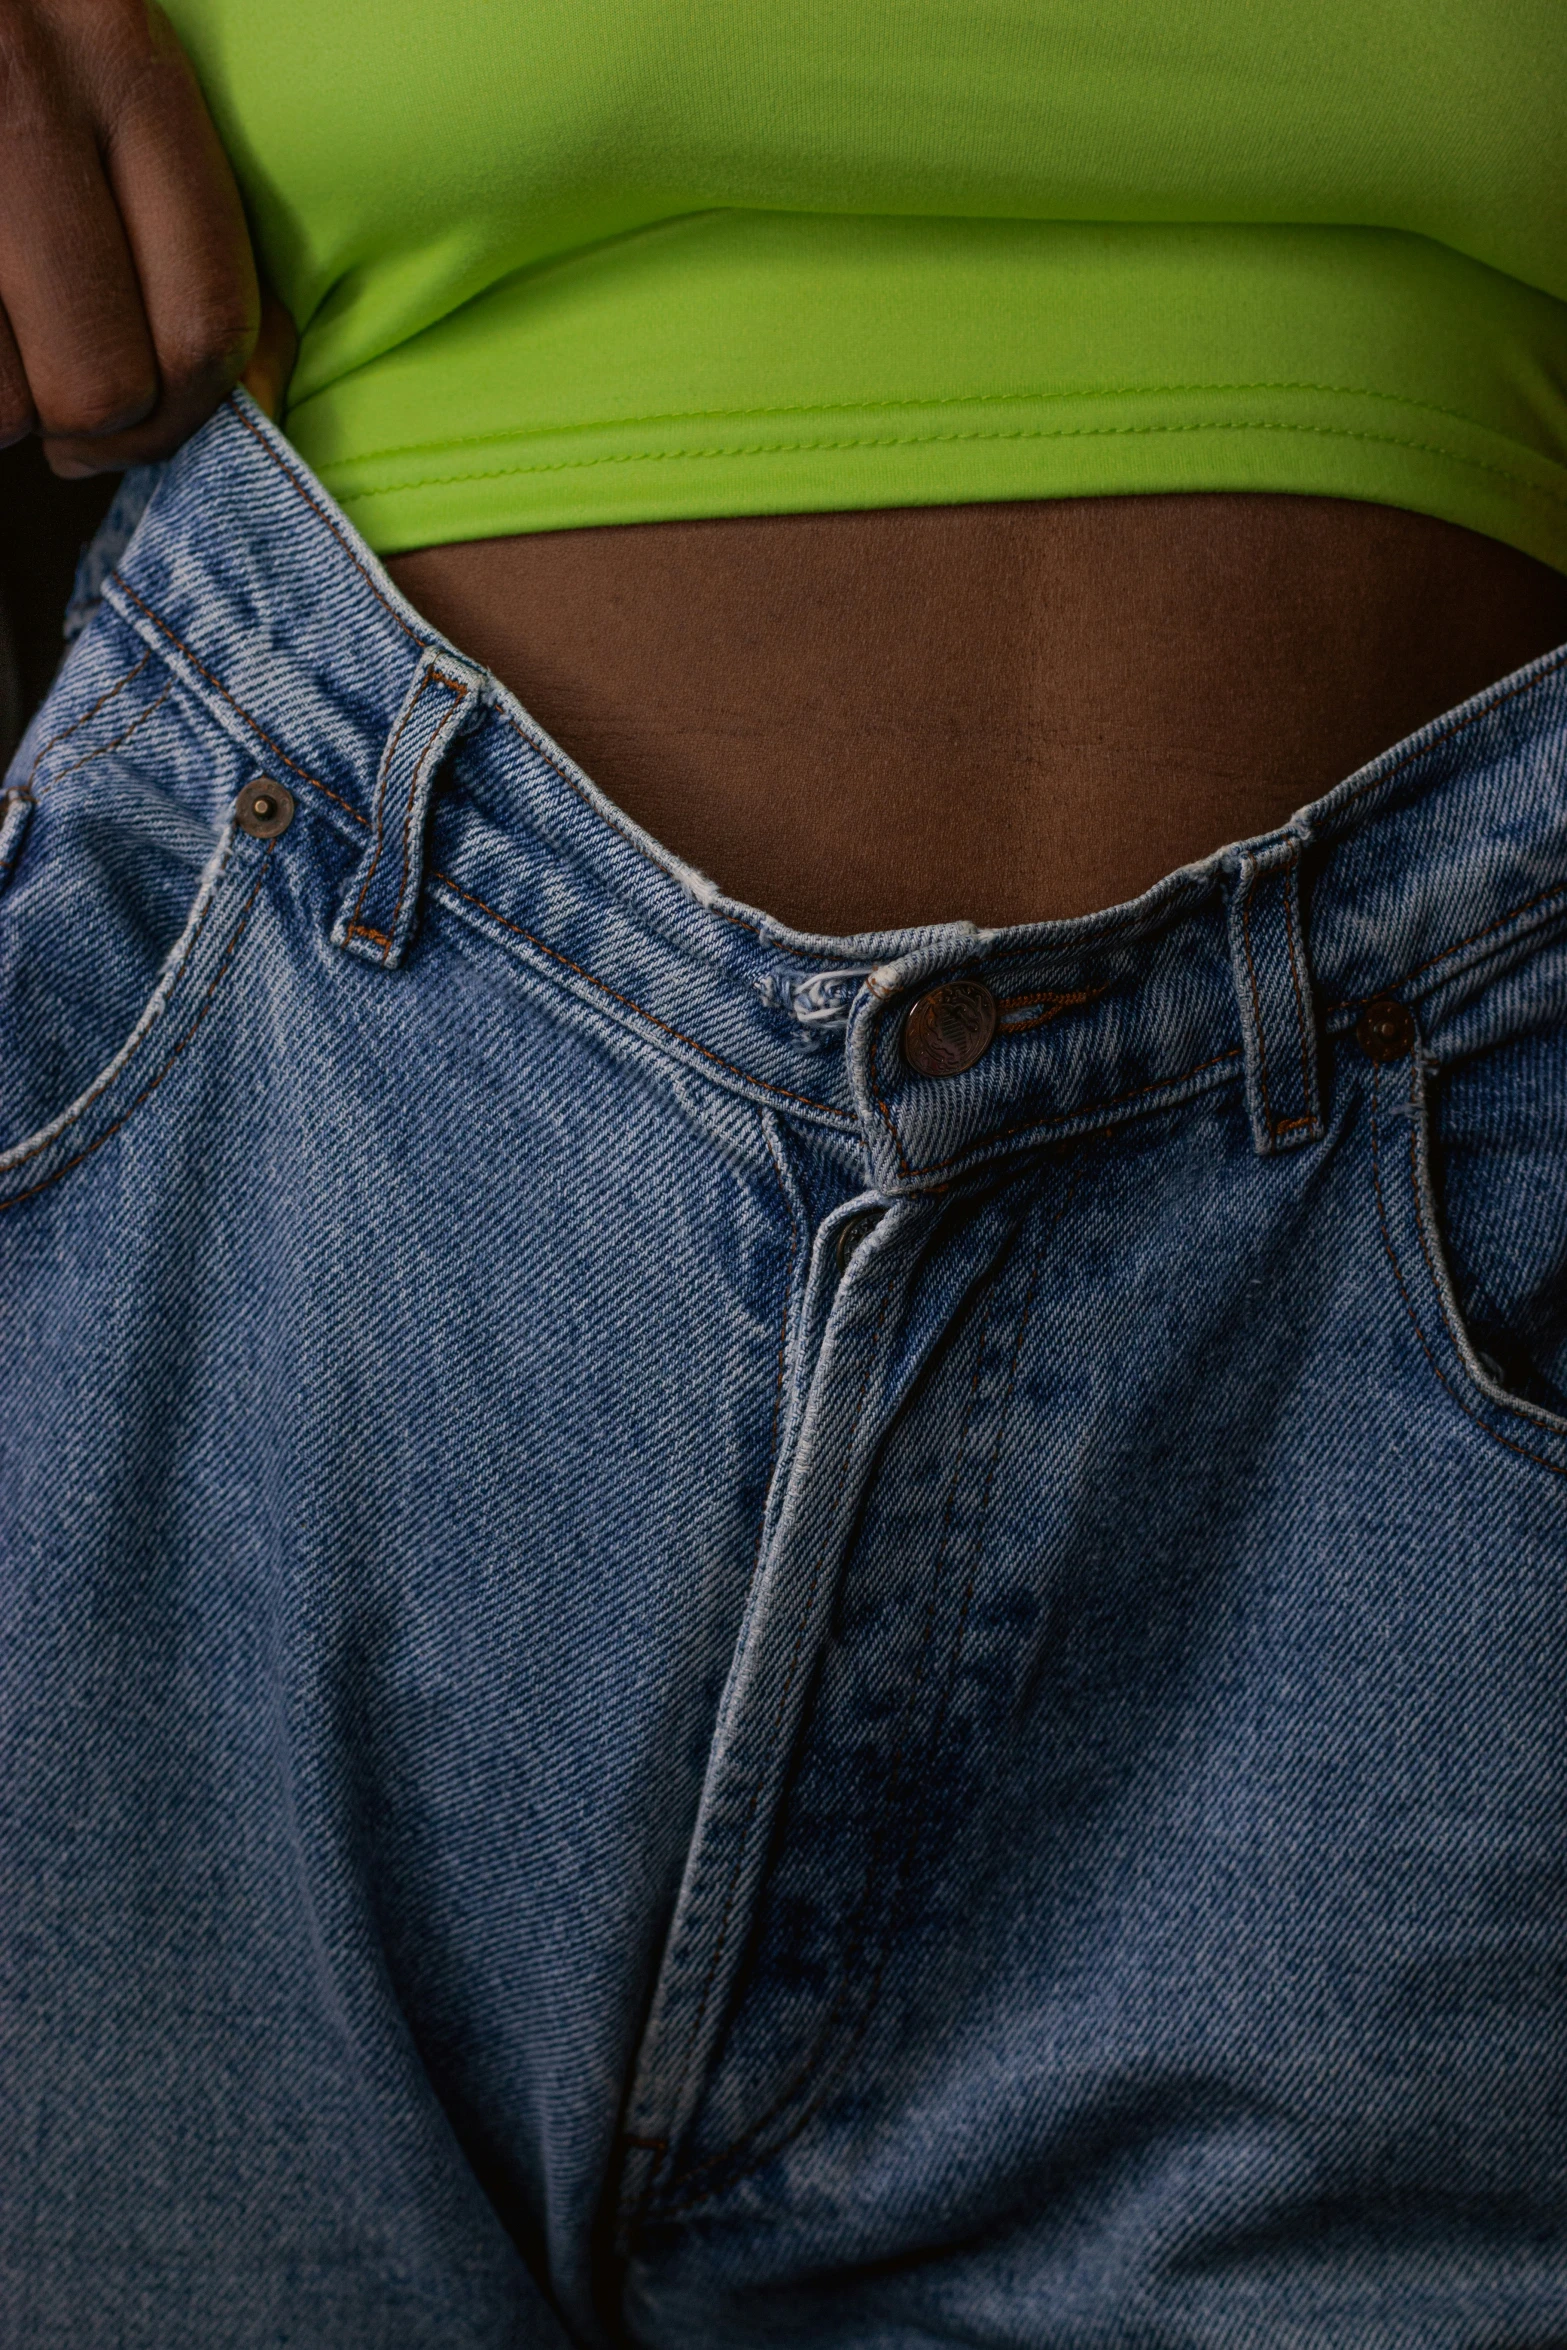 the lower portion of a woman's jeans showing her navel piercings